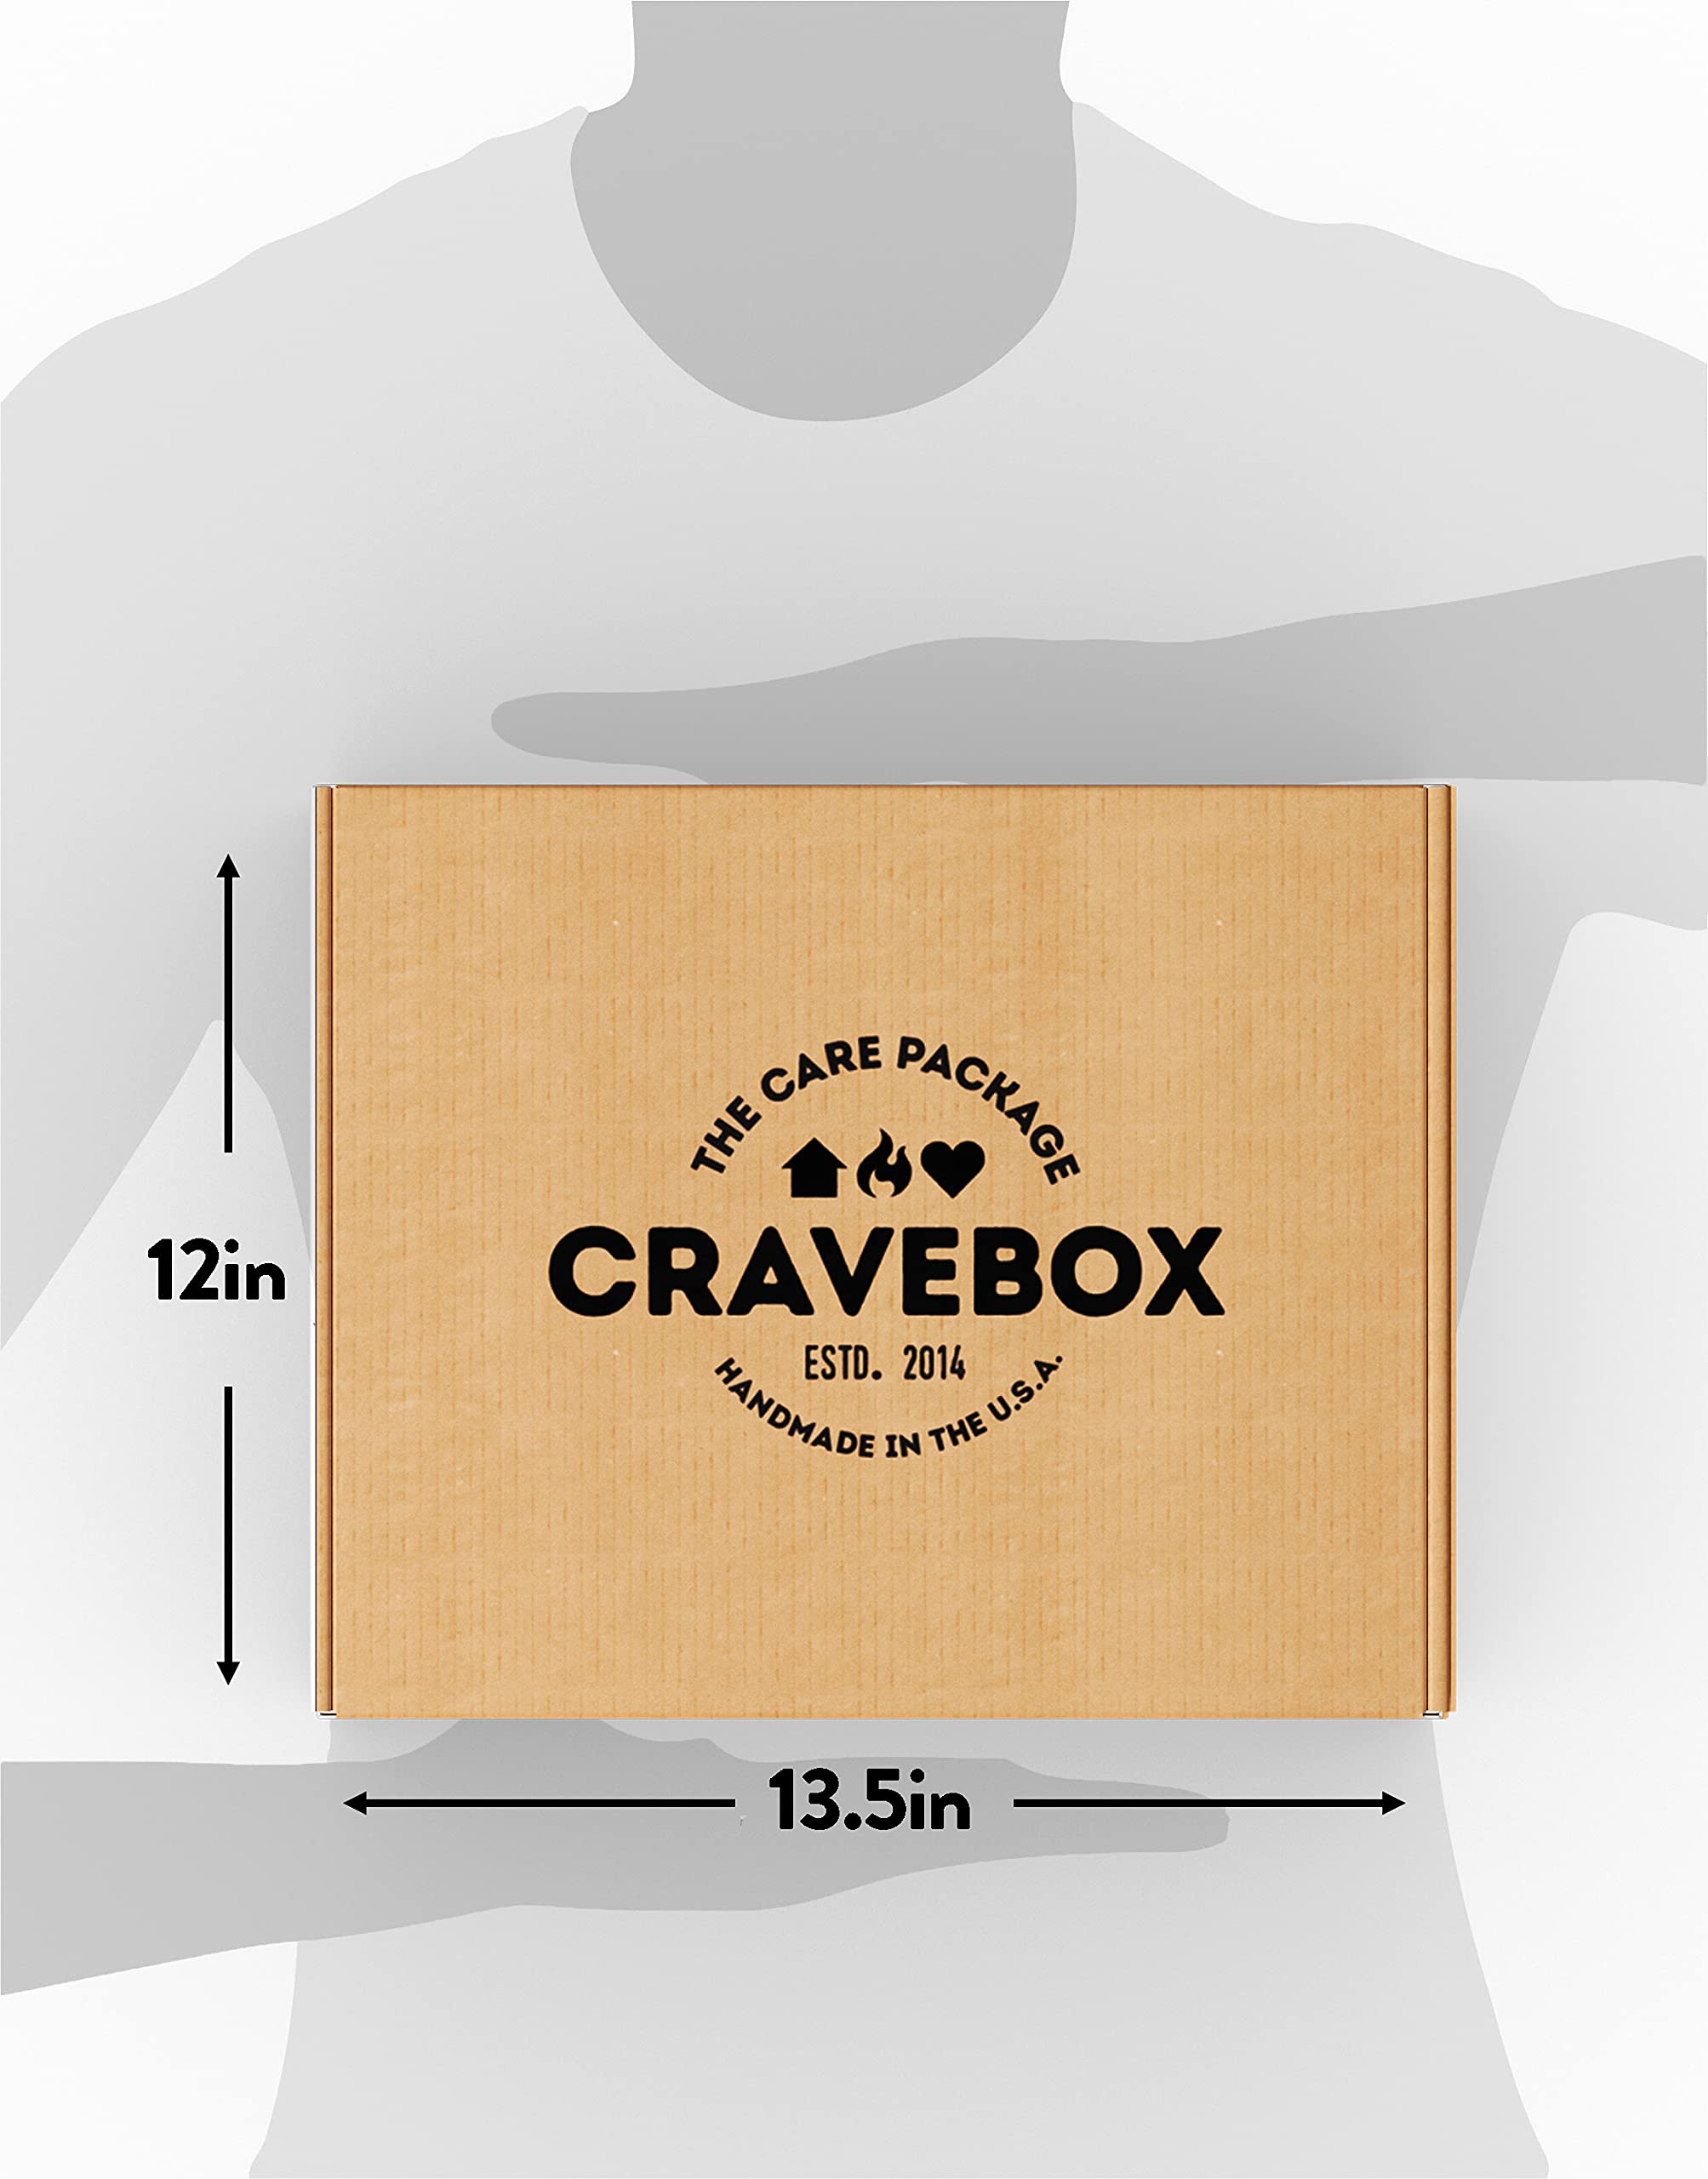 CRAVEBOX Snack Box (65 Count) Spring Finals Variety Pack Care Package Gift Basket Adult Kid Guy Girl Women Men Birthday College Student Office School